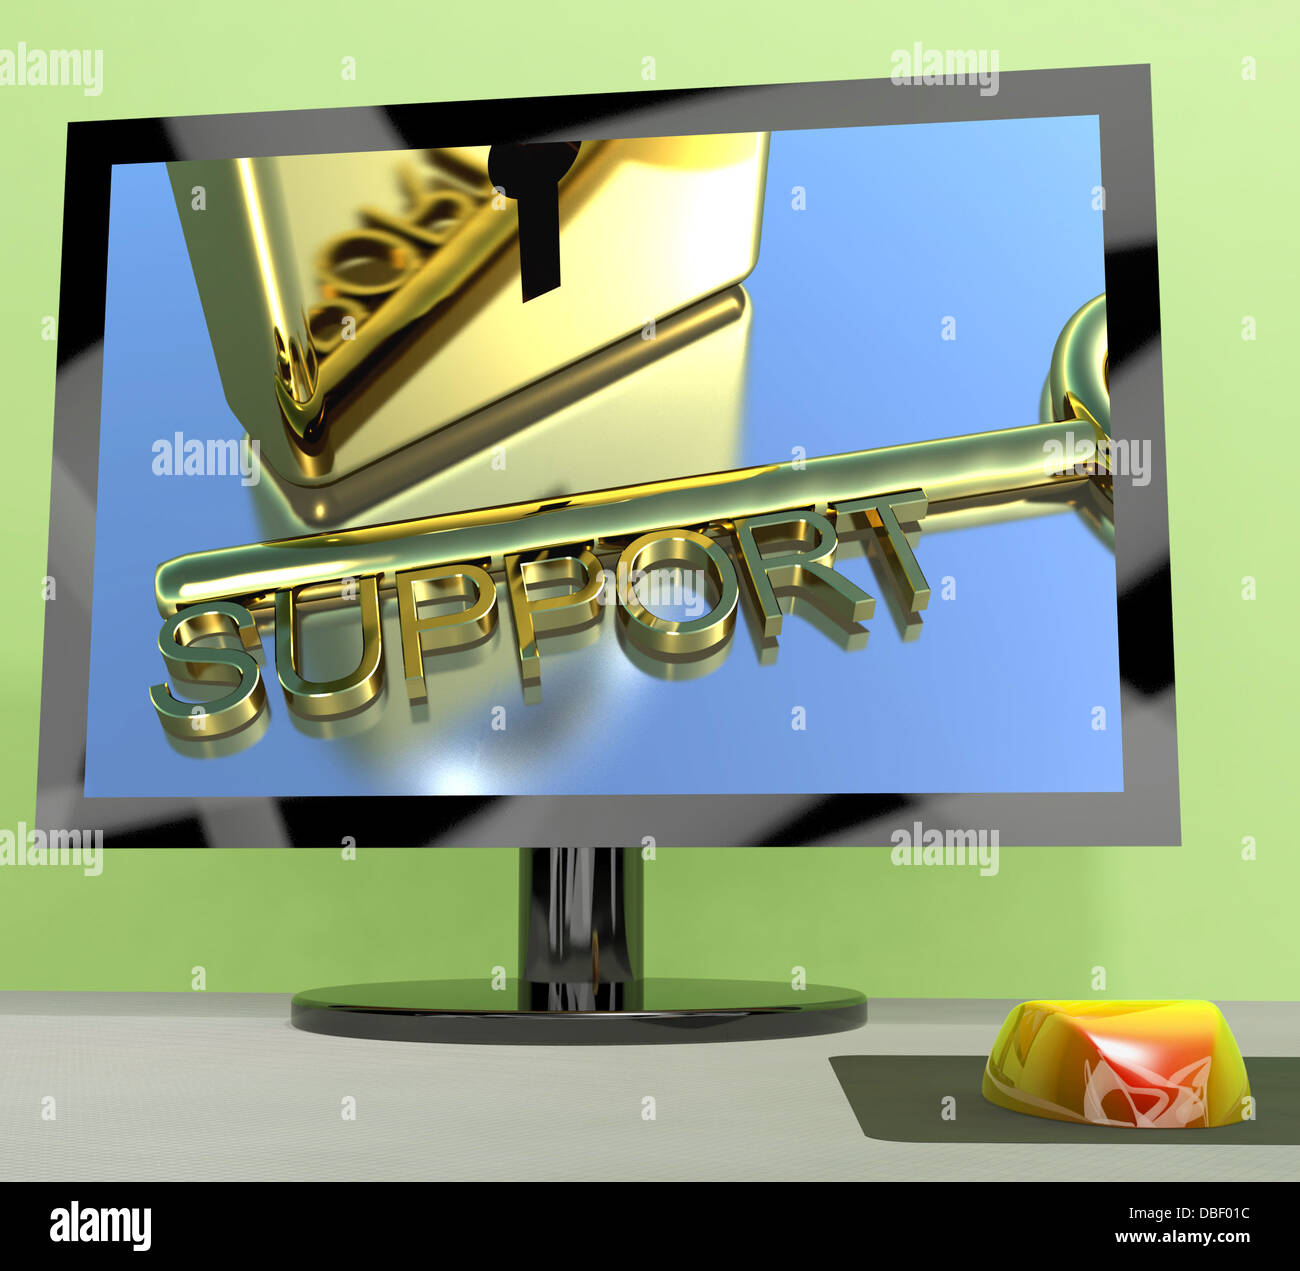 Support Key On Computer Screen Showing Online Help Stock Photo